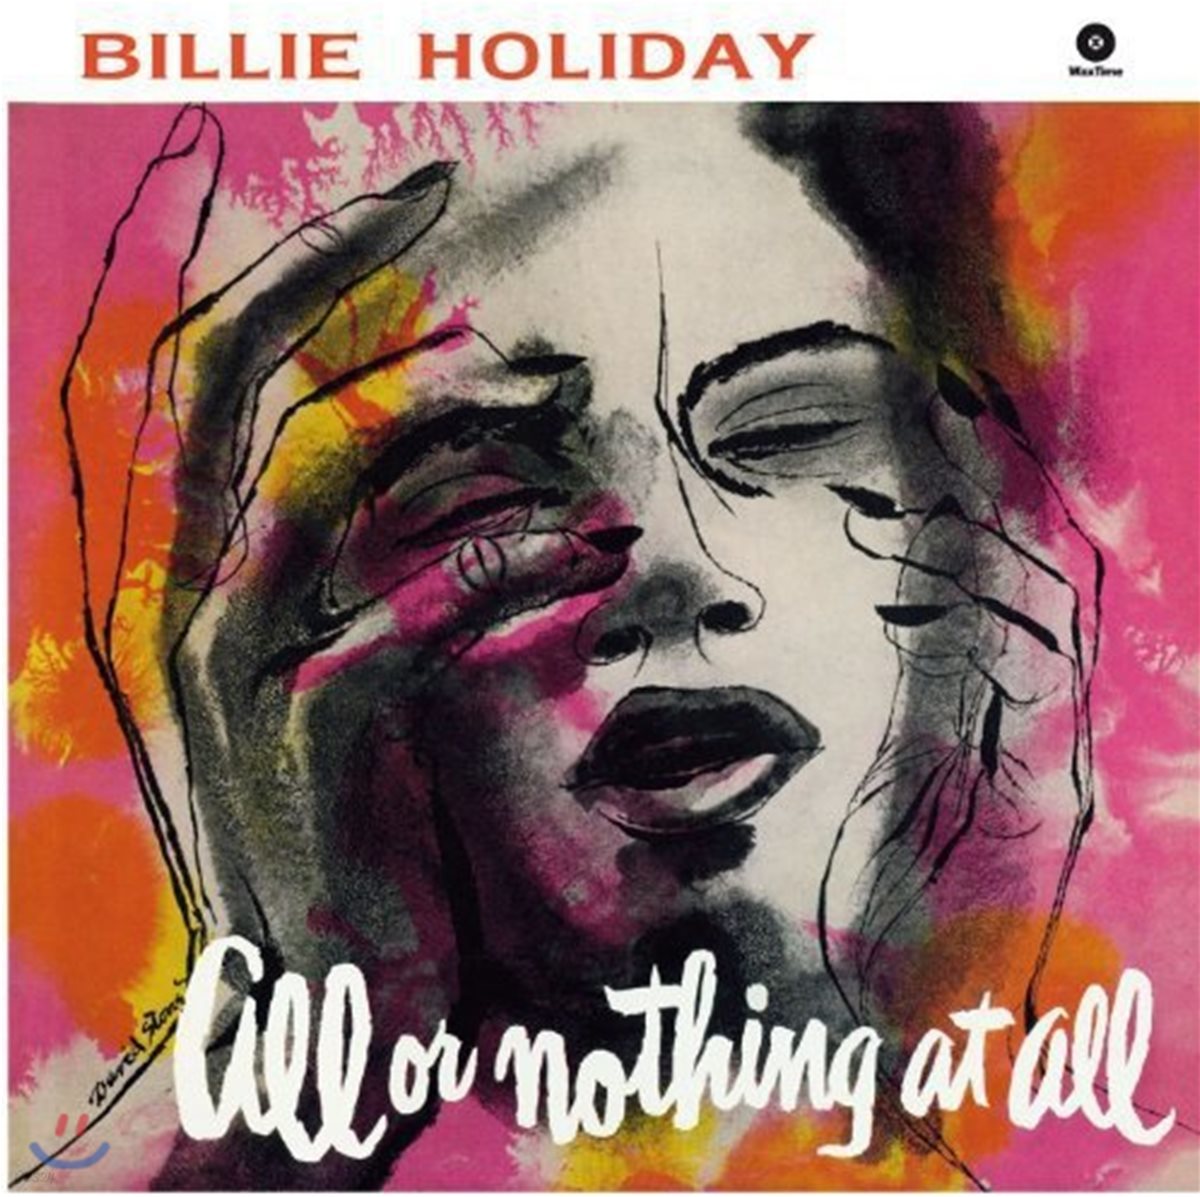 Billie Holiday (빌리 홀리데이) - All Or Nothing At All [LP]